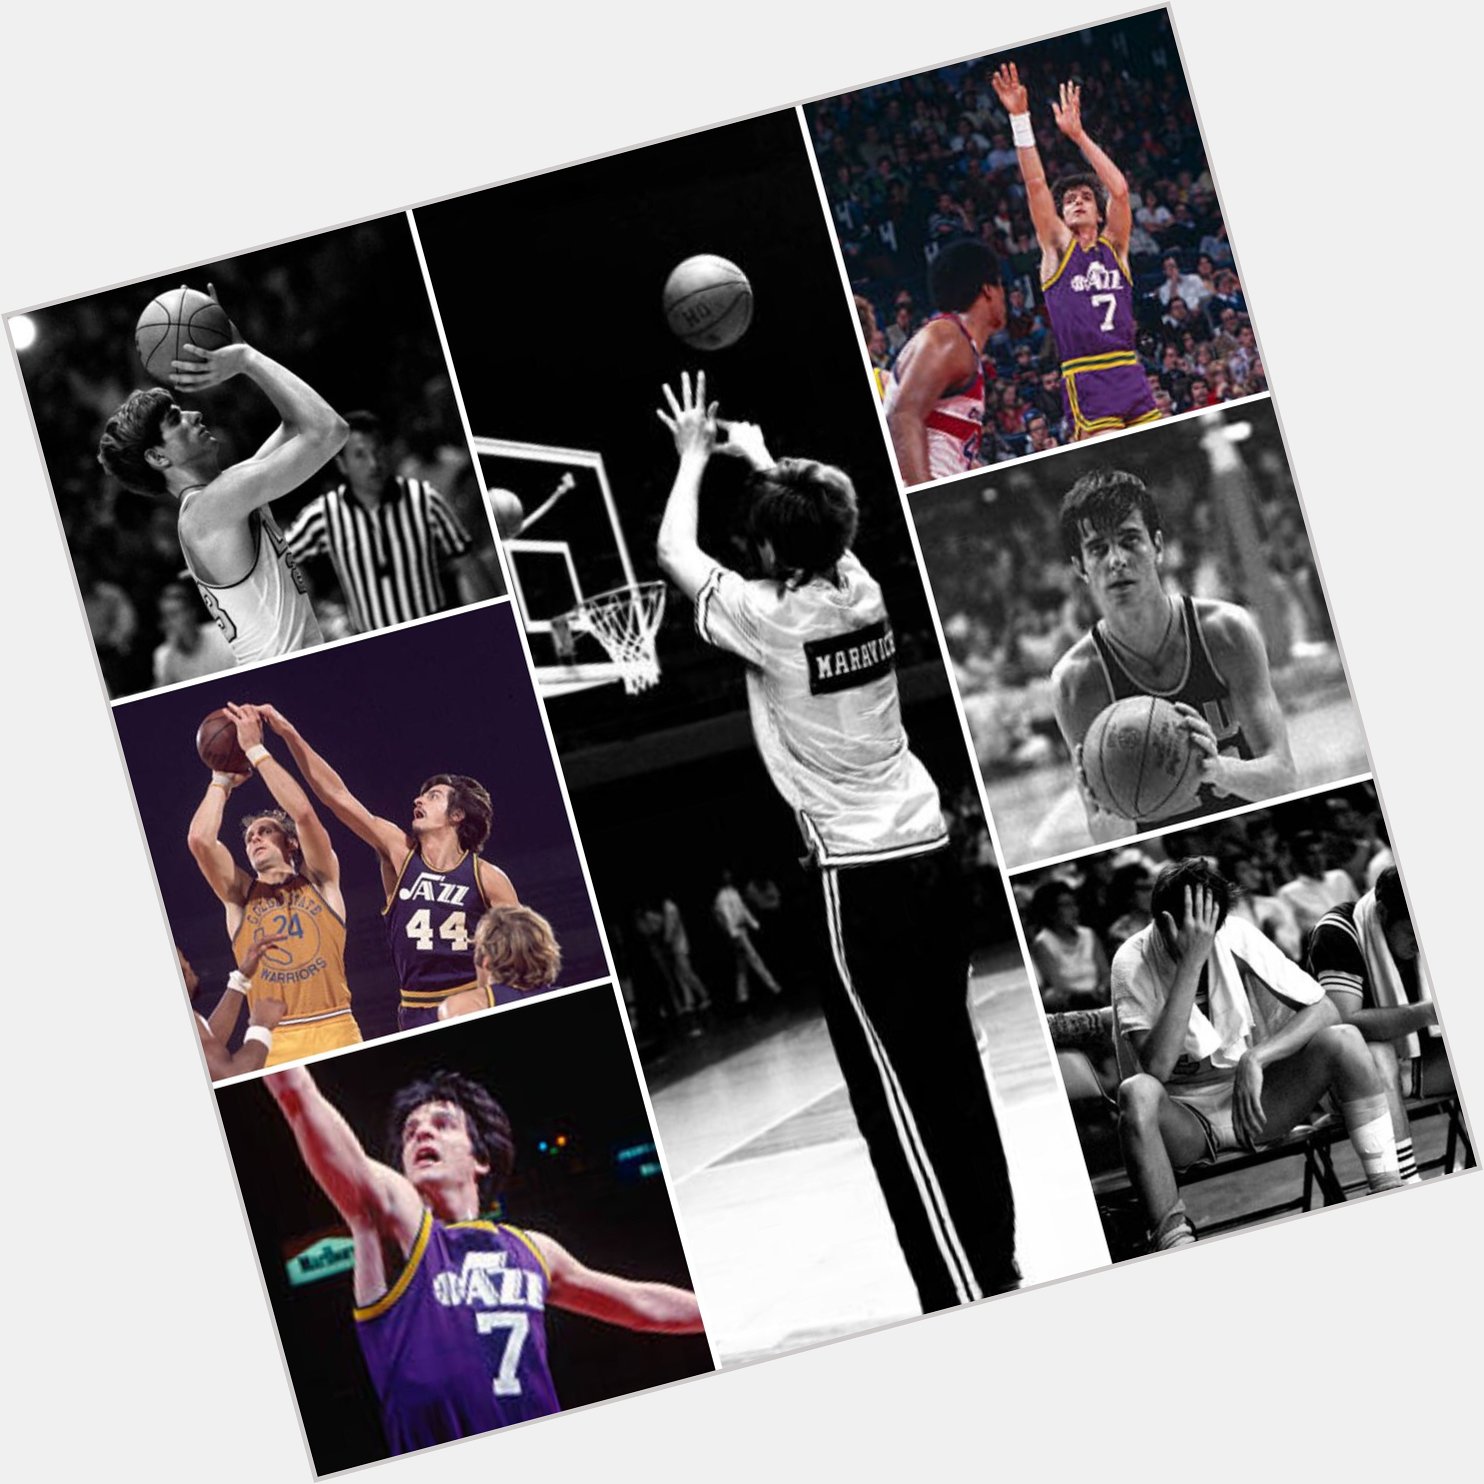 Happy Birthday Pistol Pete Maravich. Your legacy has always and will forever amaze me. 